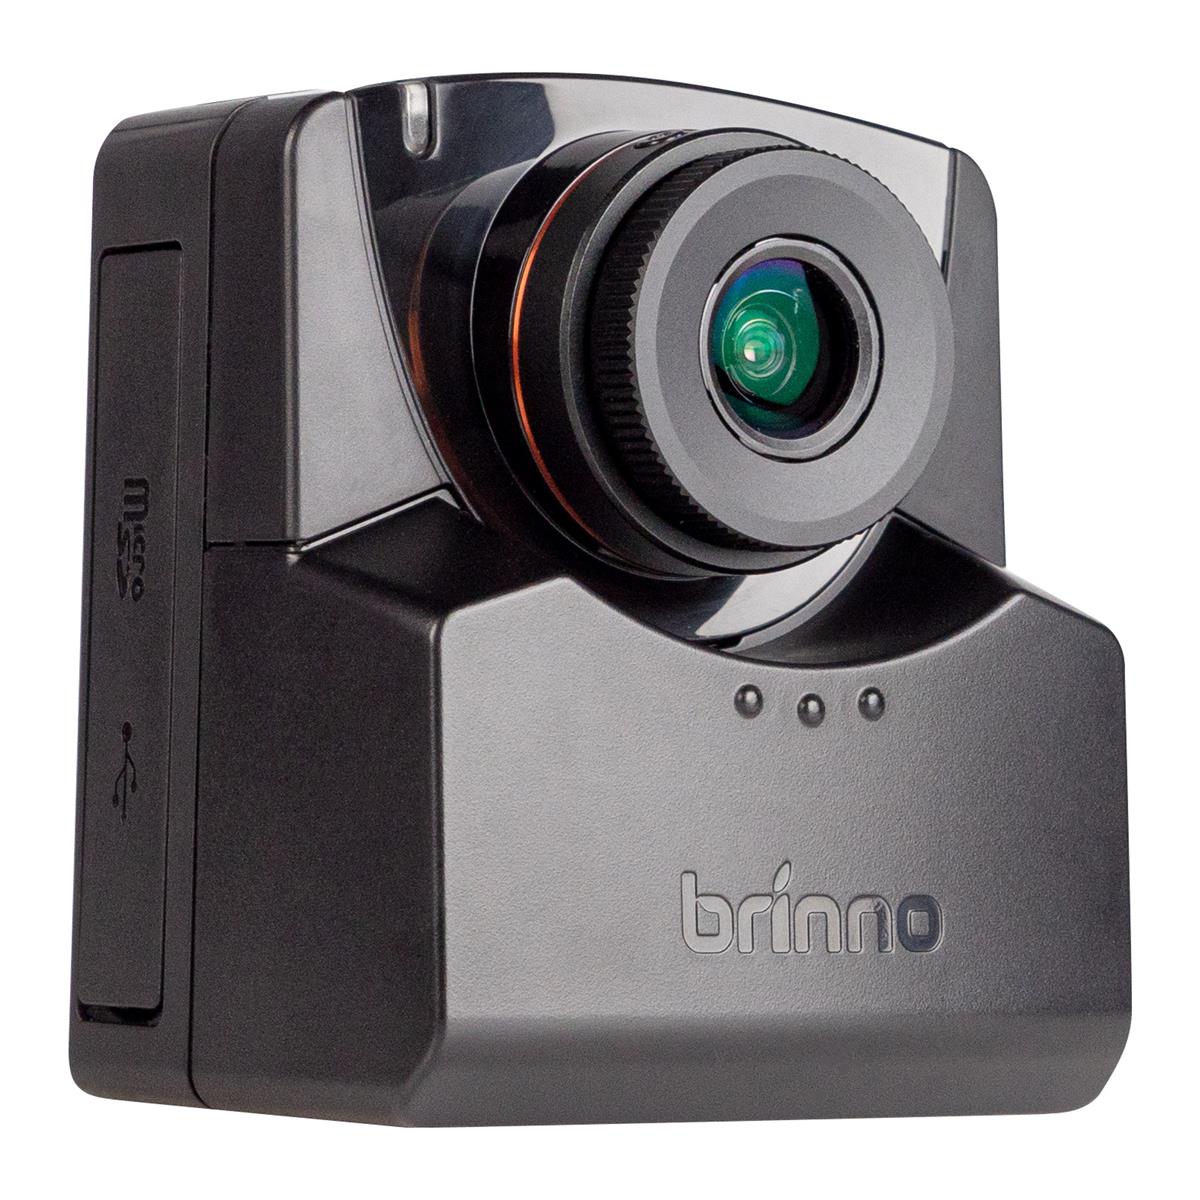 Image of Brinno EMPOWER TLC2020 Time Lapse Full HD Video Camera